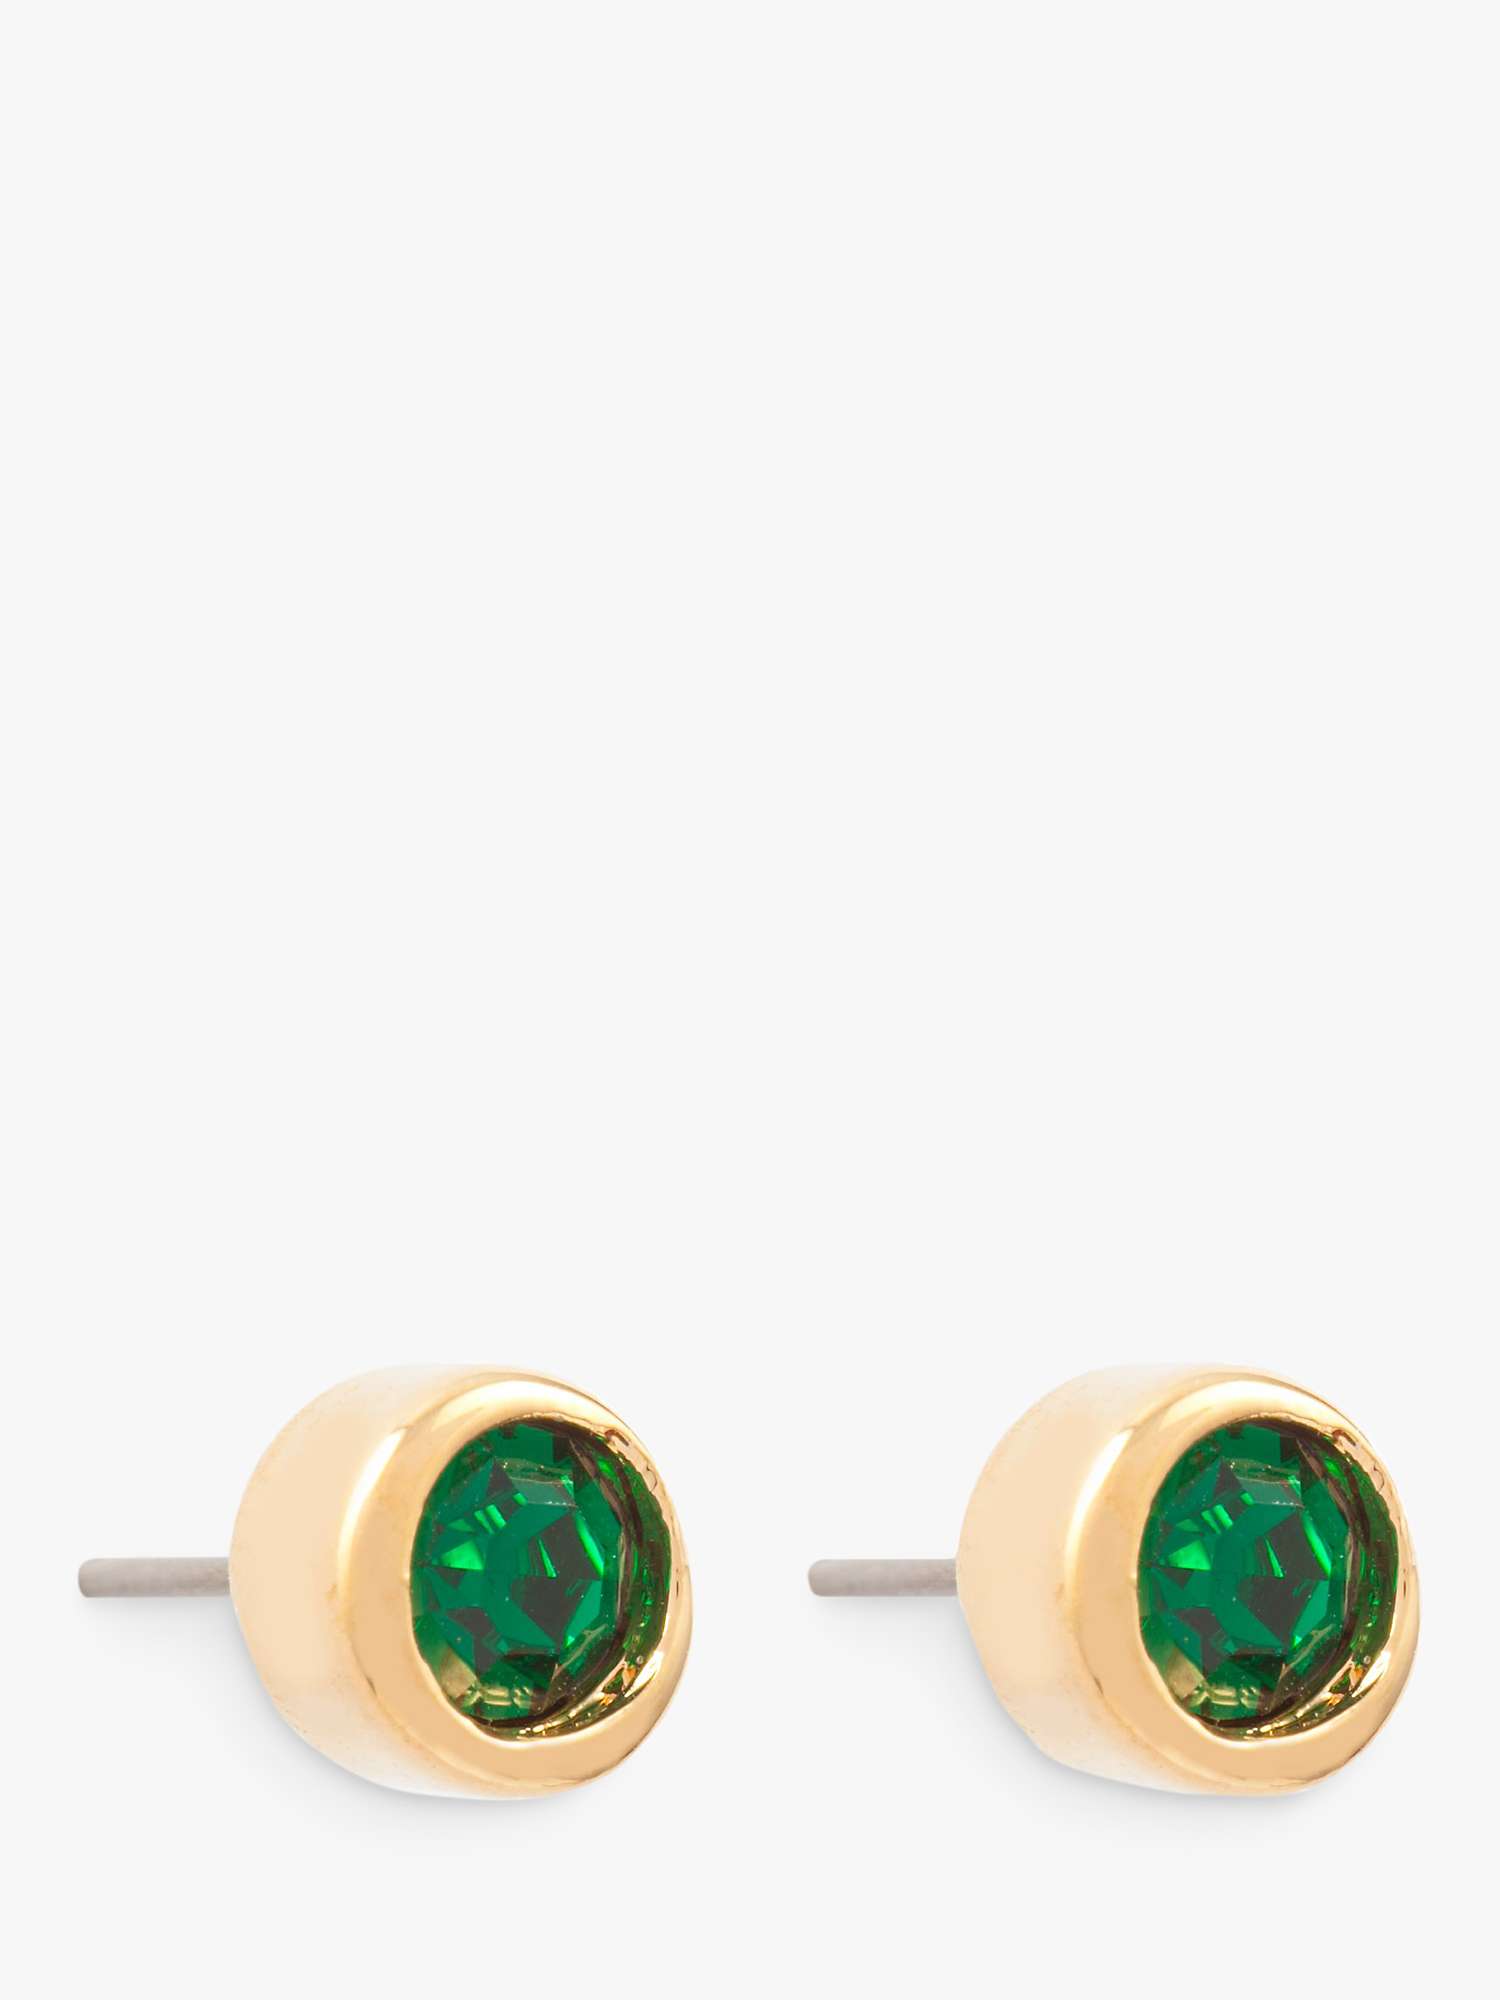 Buy Susan Caplan Vintage D'Orlan 22ct Gold Plated Swarovski Crystal Round Stud Earrings, Dated Circa 1980s, Gold/Green Online at johnlewis.com